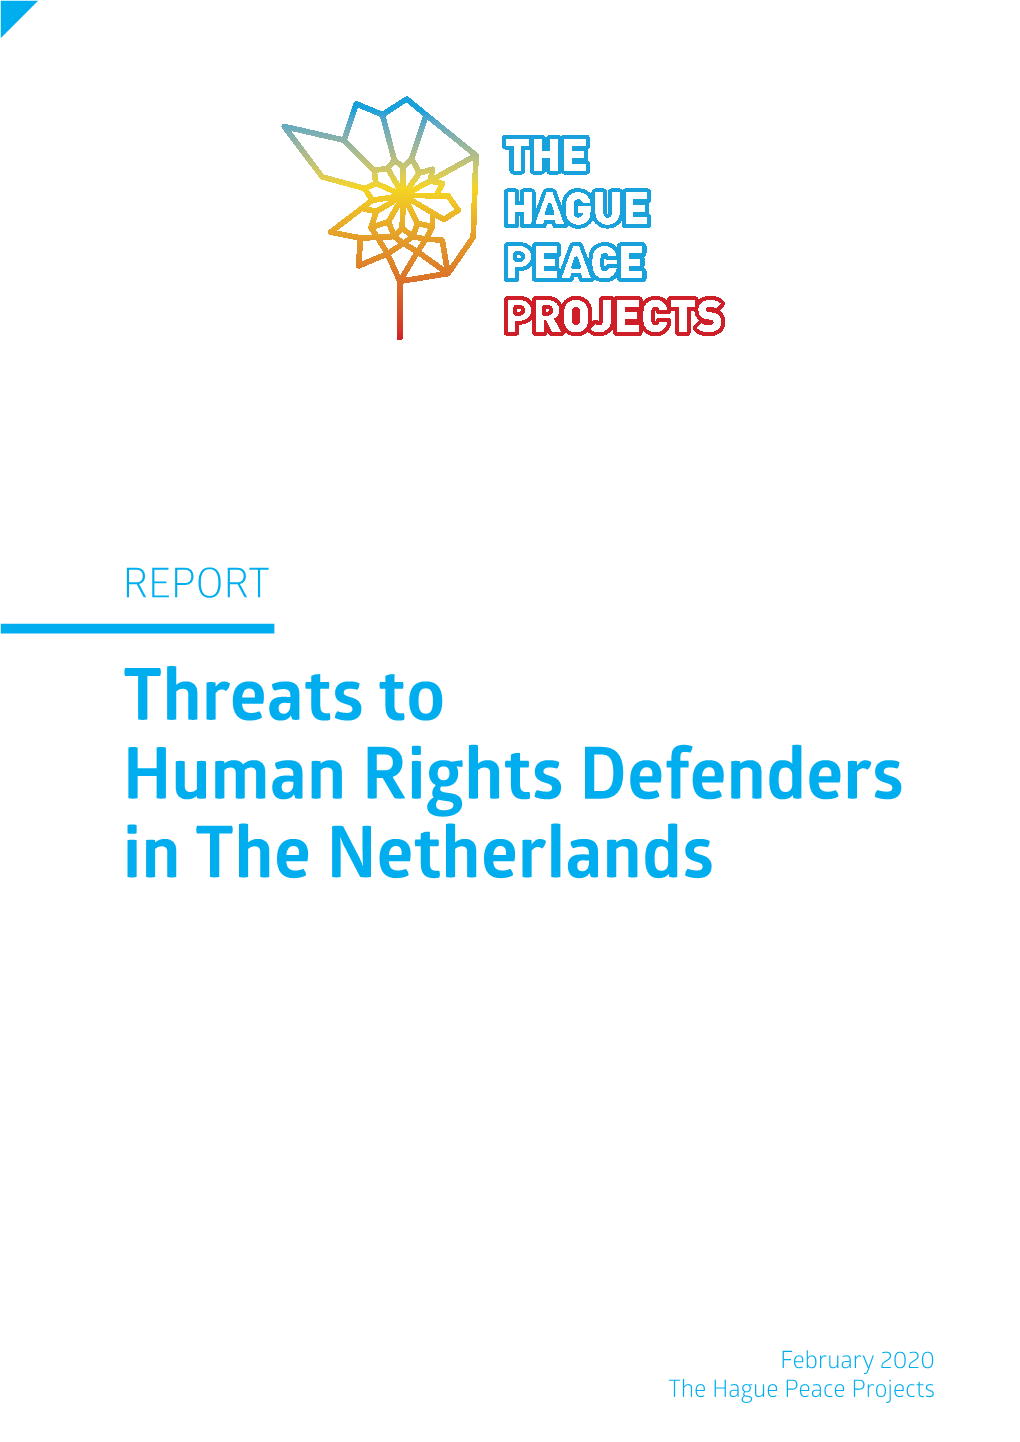 Threats to Human Rights Defenders in the Netherlands